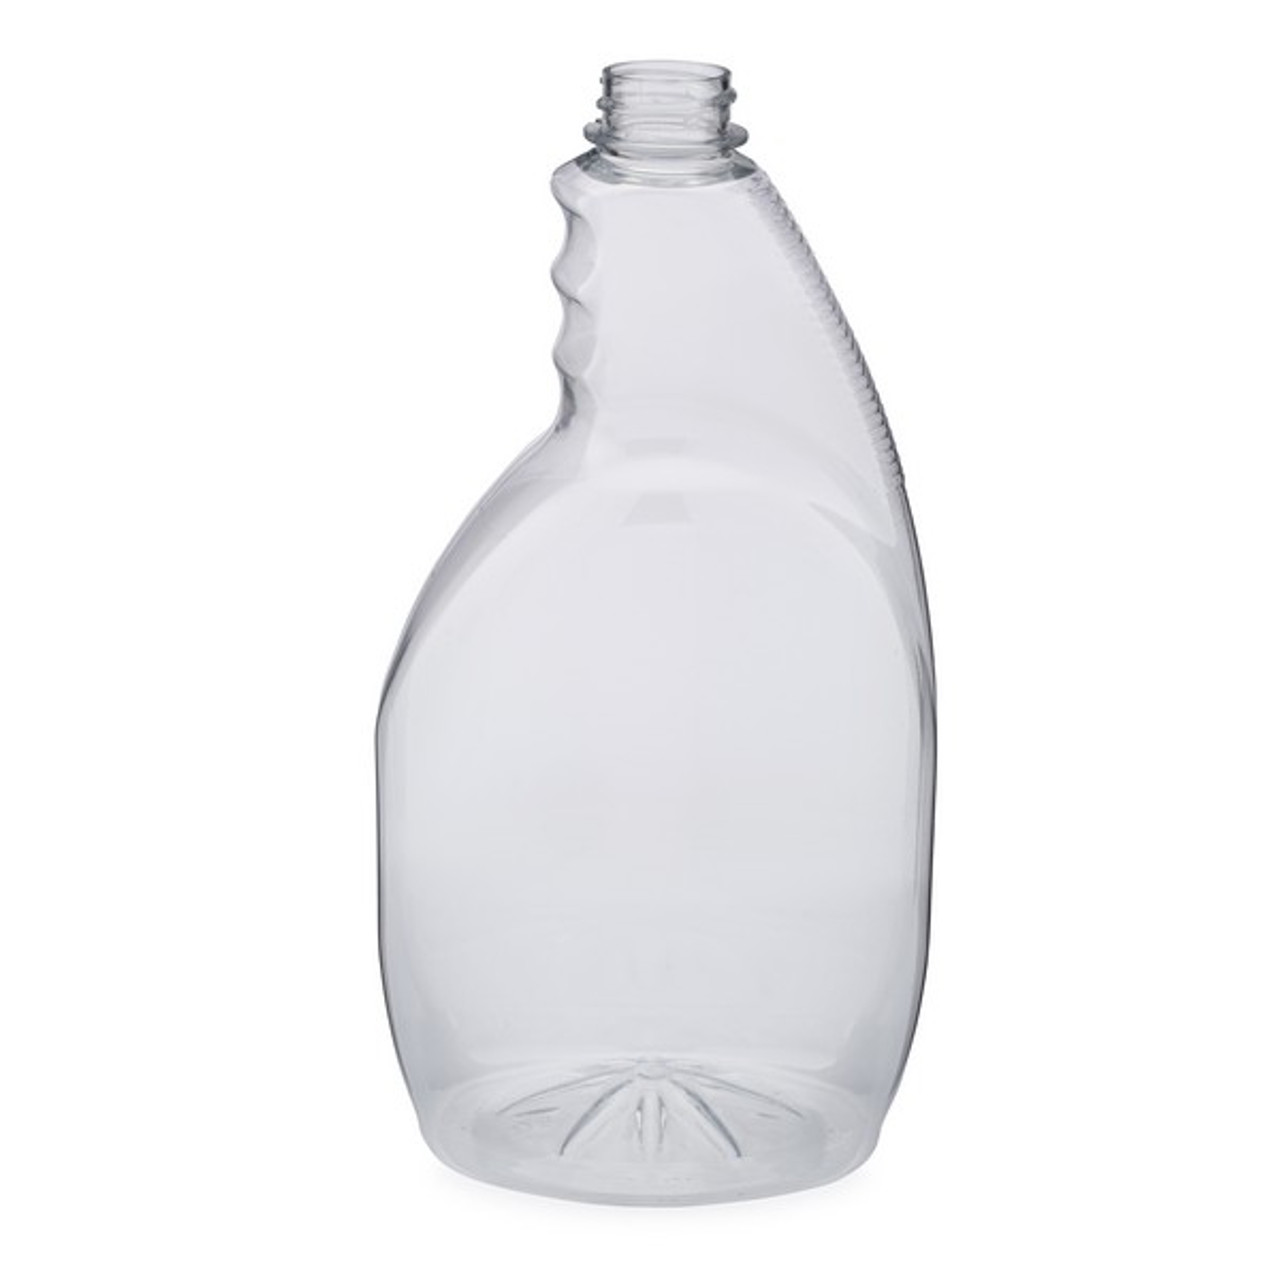 32 oz Clear Pet Plastic Spray Bottles (Cap Not Included) - Clear BPA Free 28-400